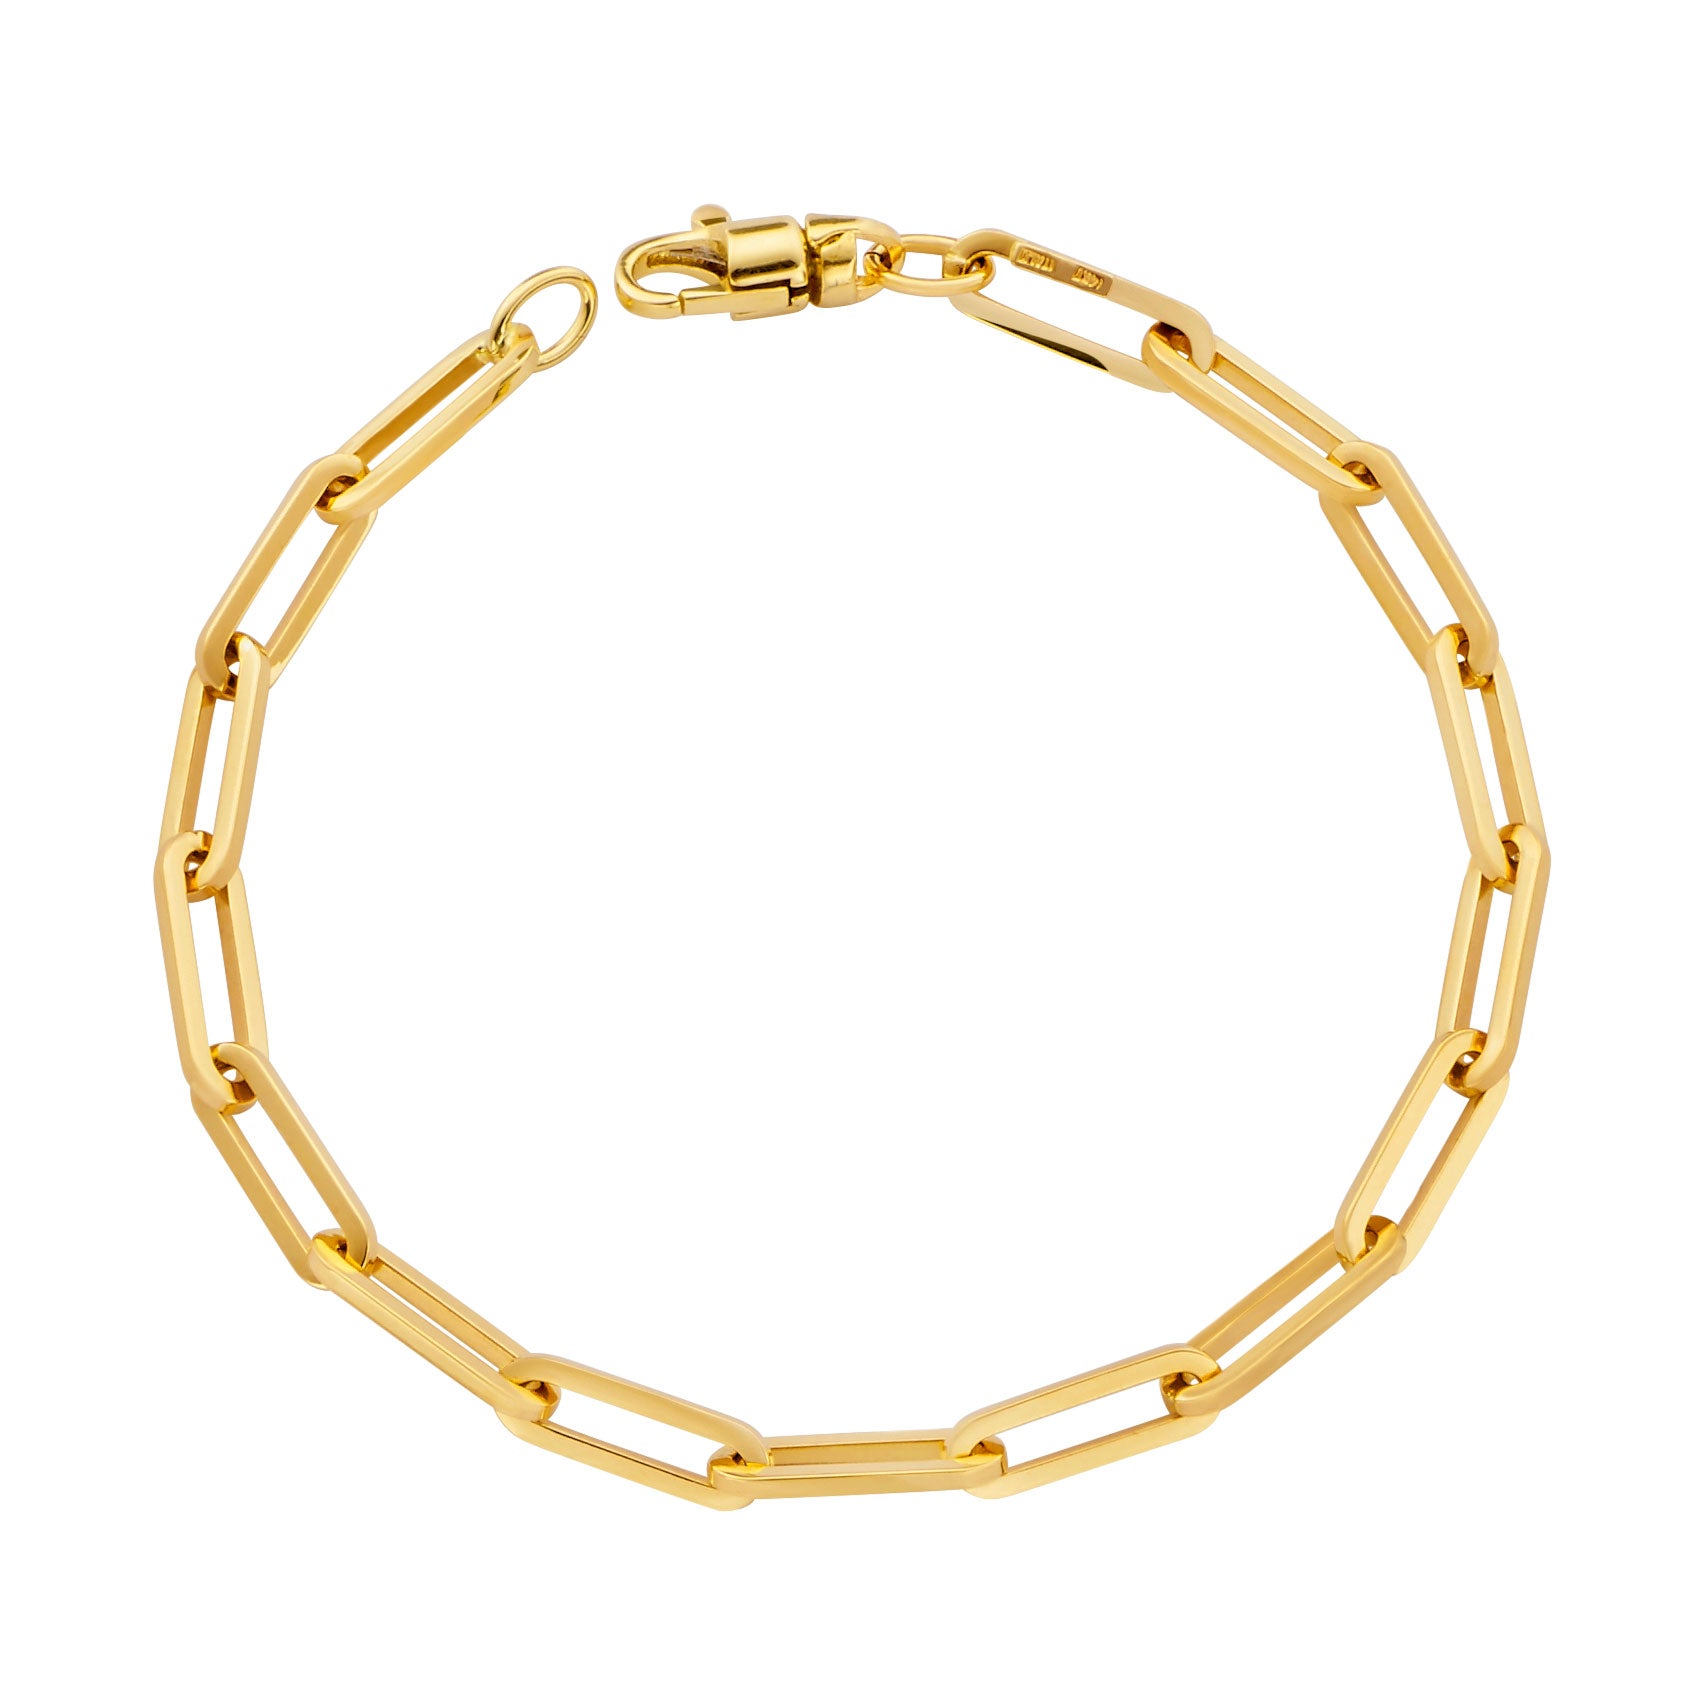 HERCO 14K YELLOW GOLD SOLID PAPERCLIP BRACELET